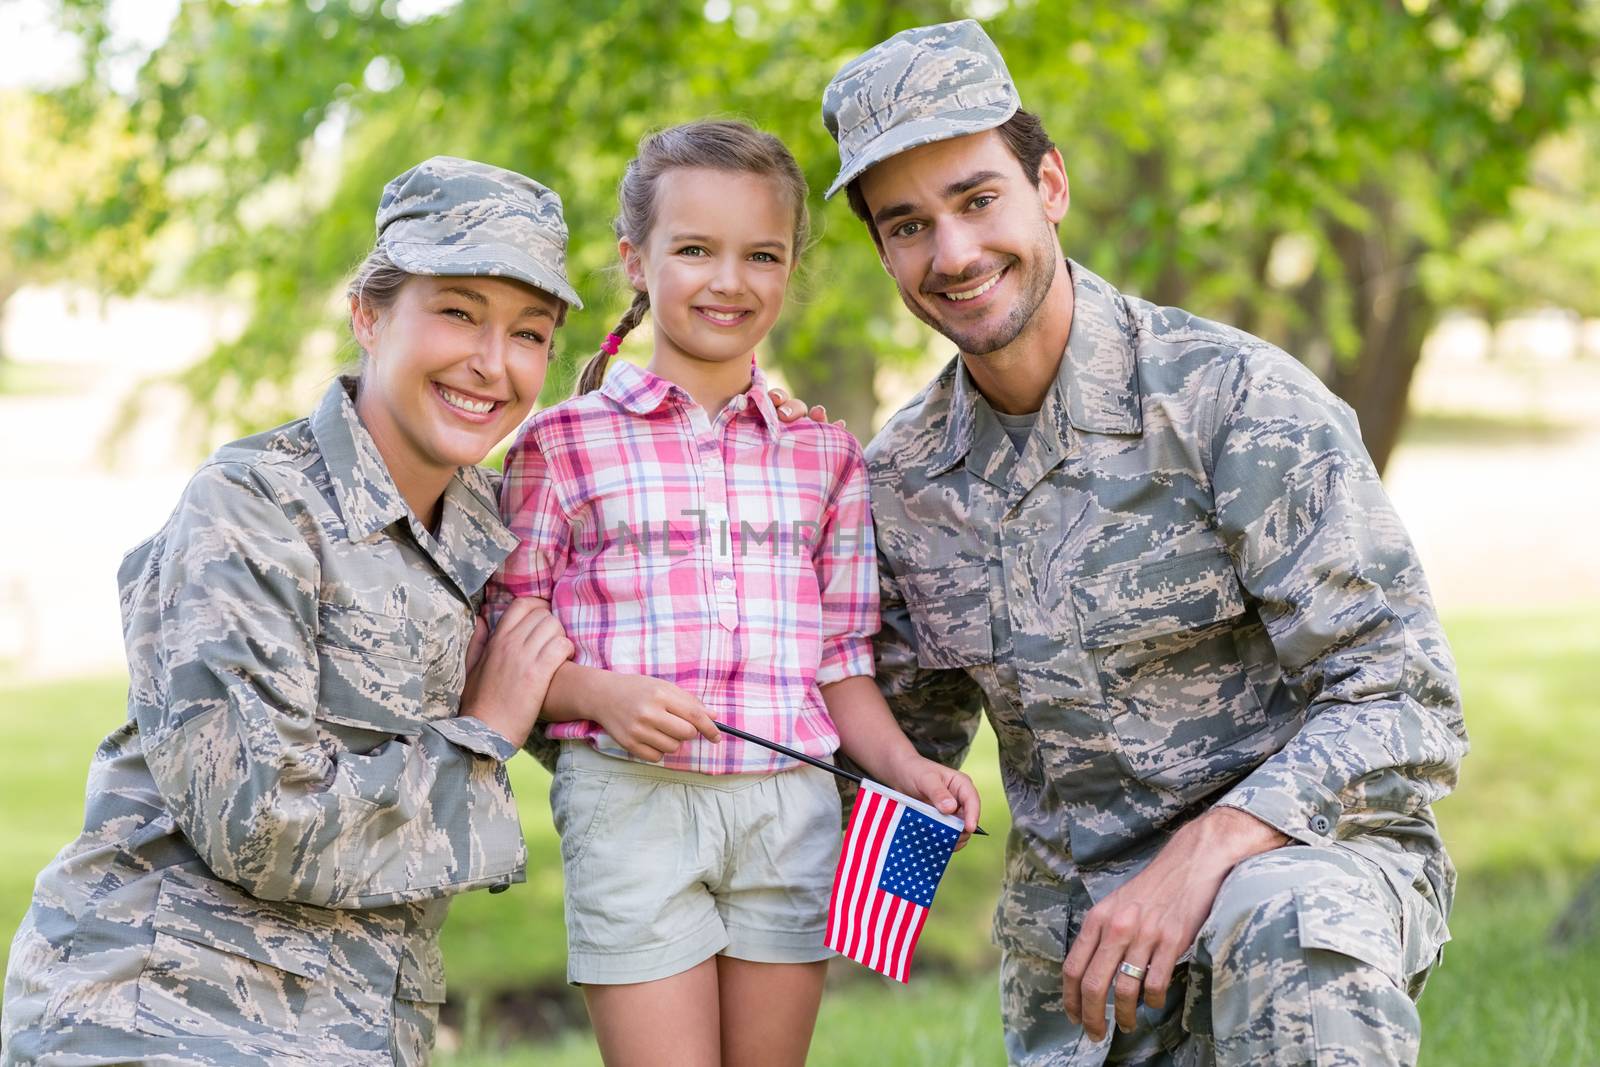 military couple with their daughter in park